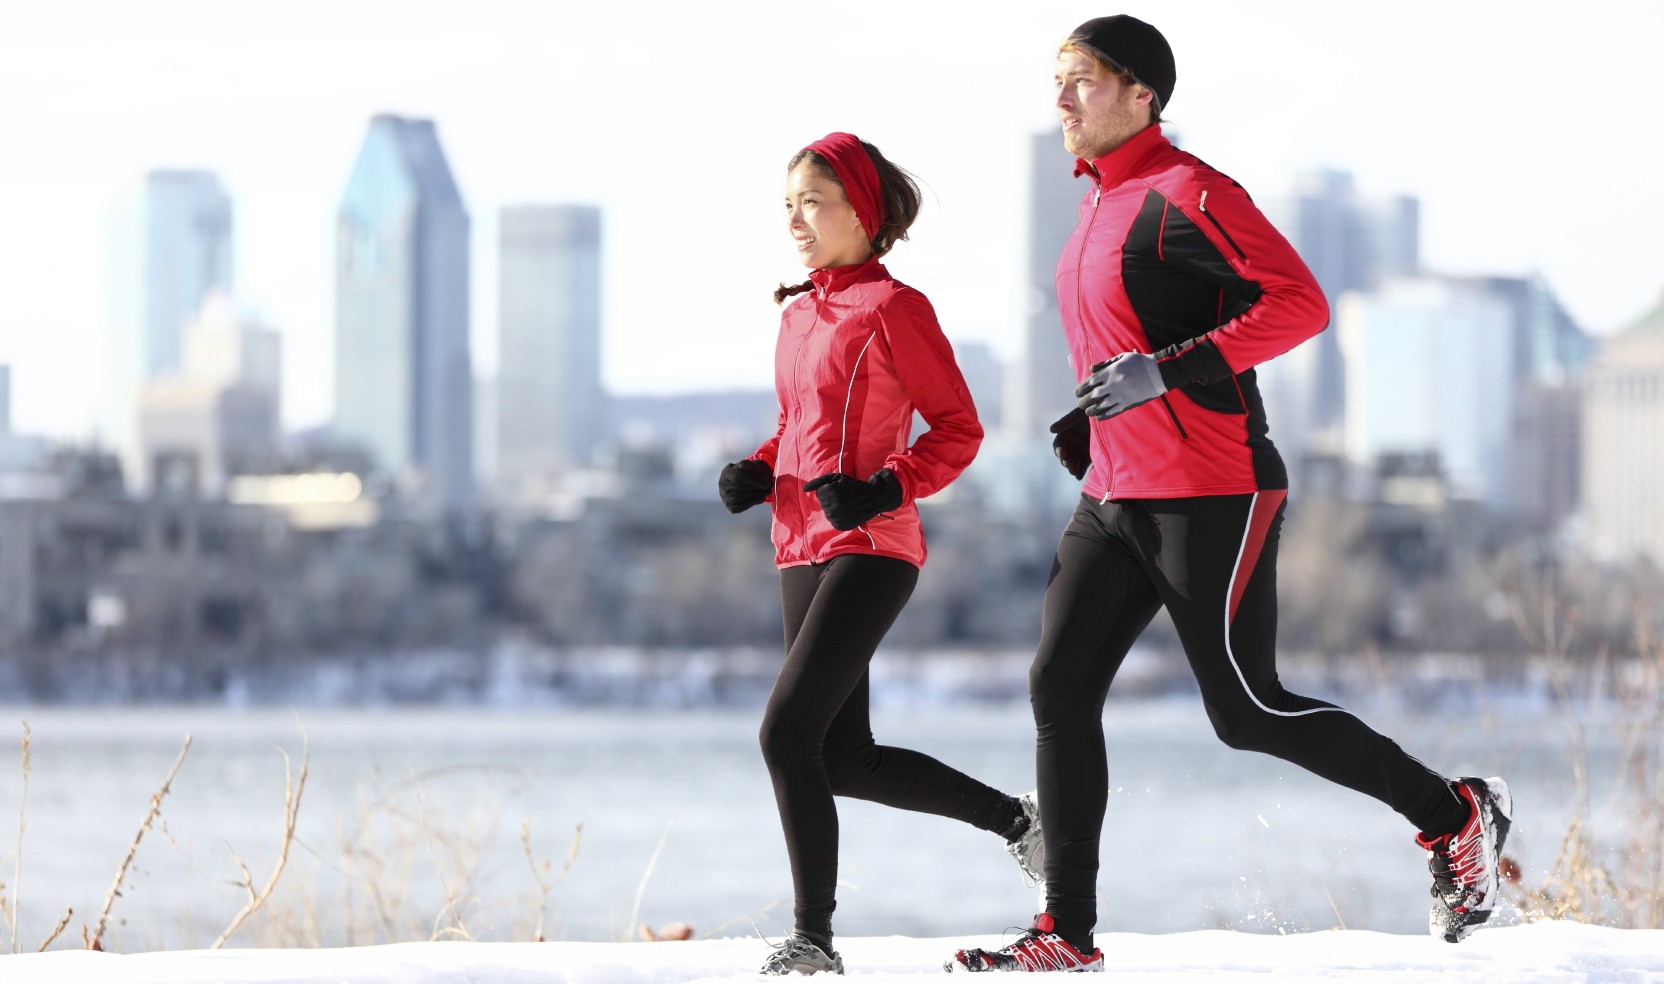 Runners running in winter snow with city skyline background. Healthy multiracial young couple. Asian woman runner and Caucasian man running with Montreal skyline, Quebec, Canada